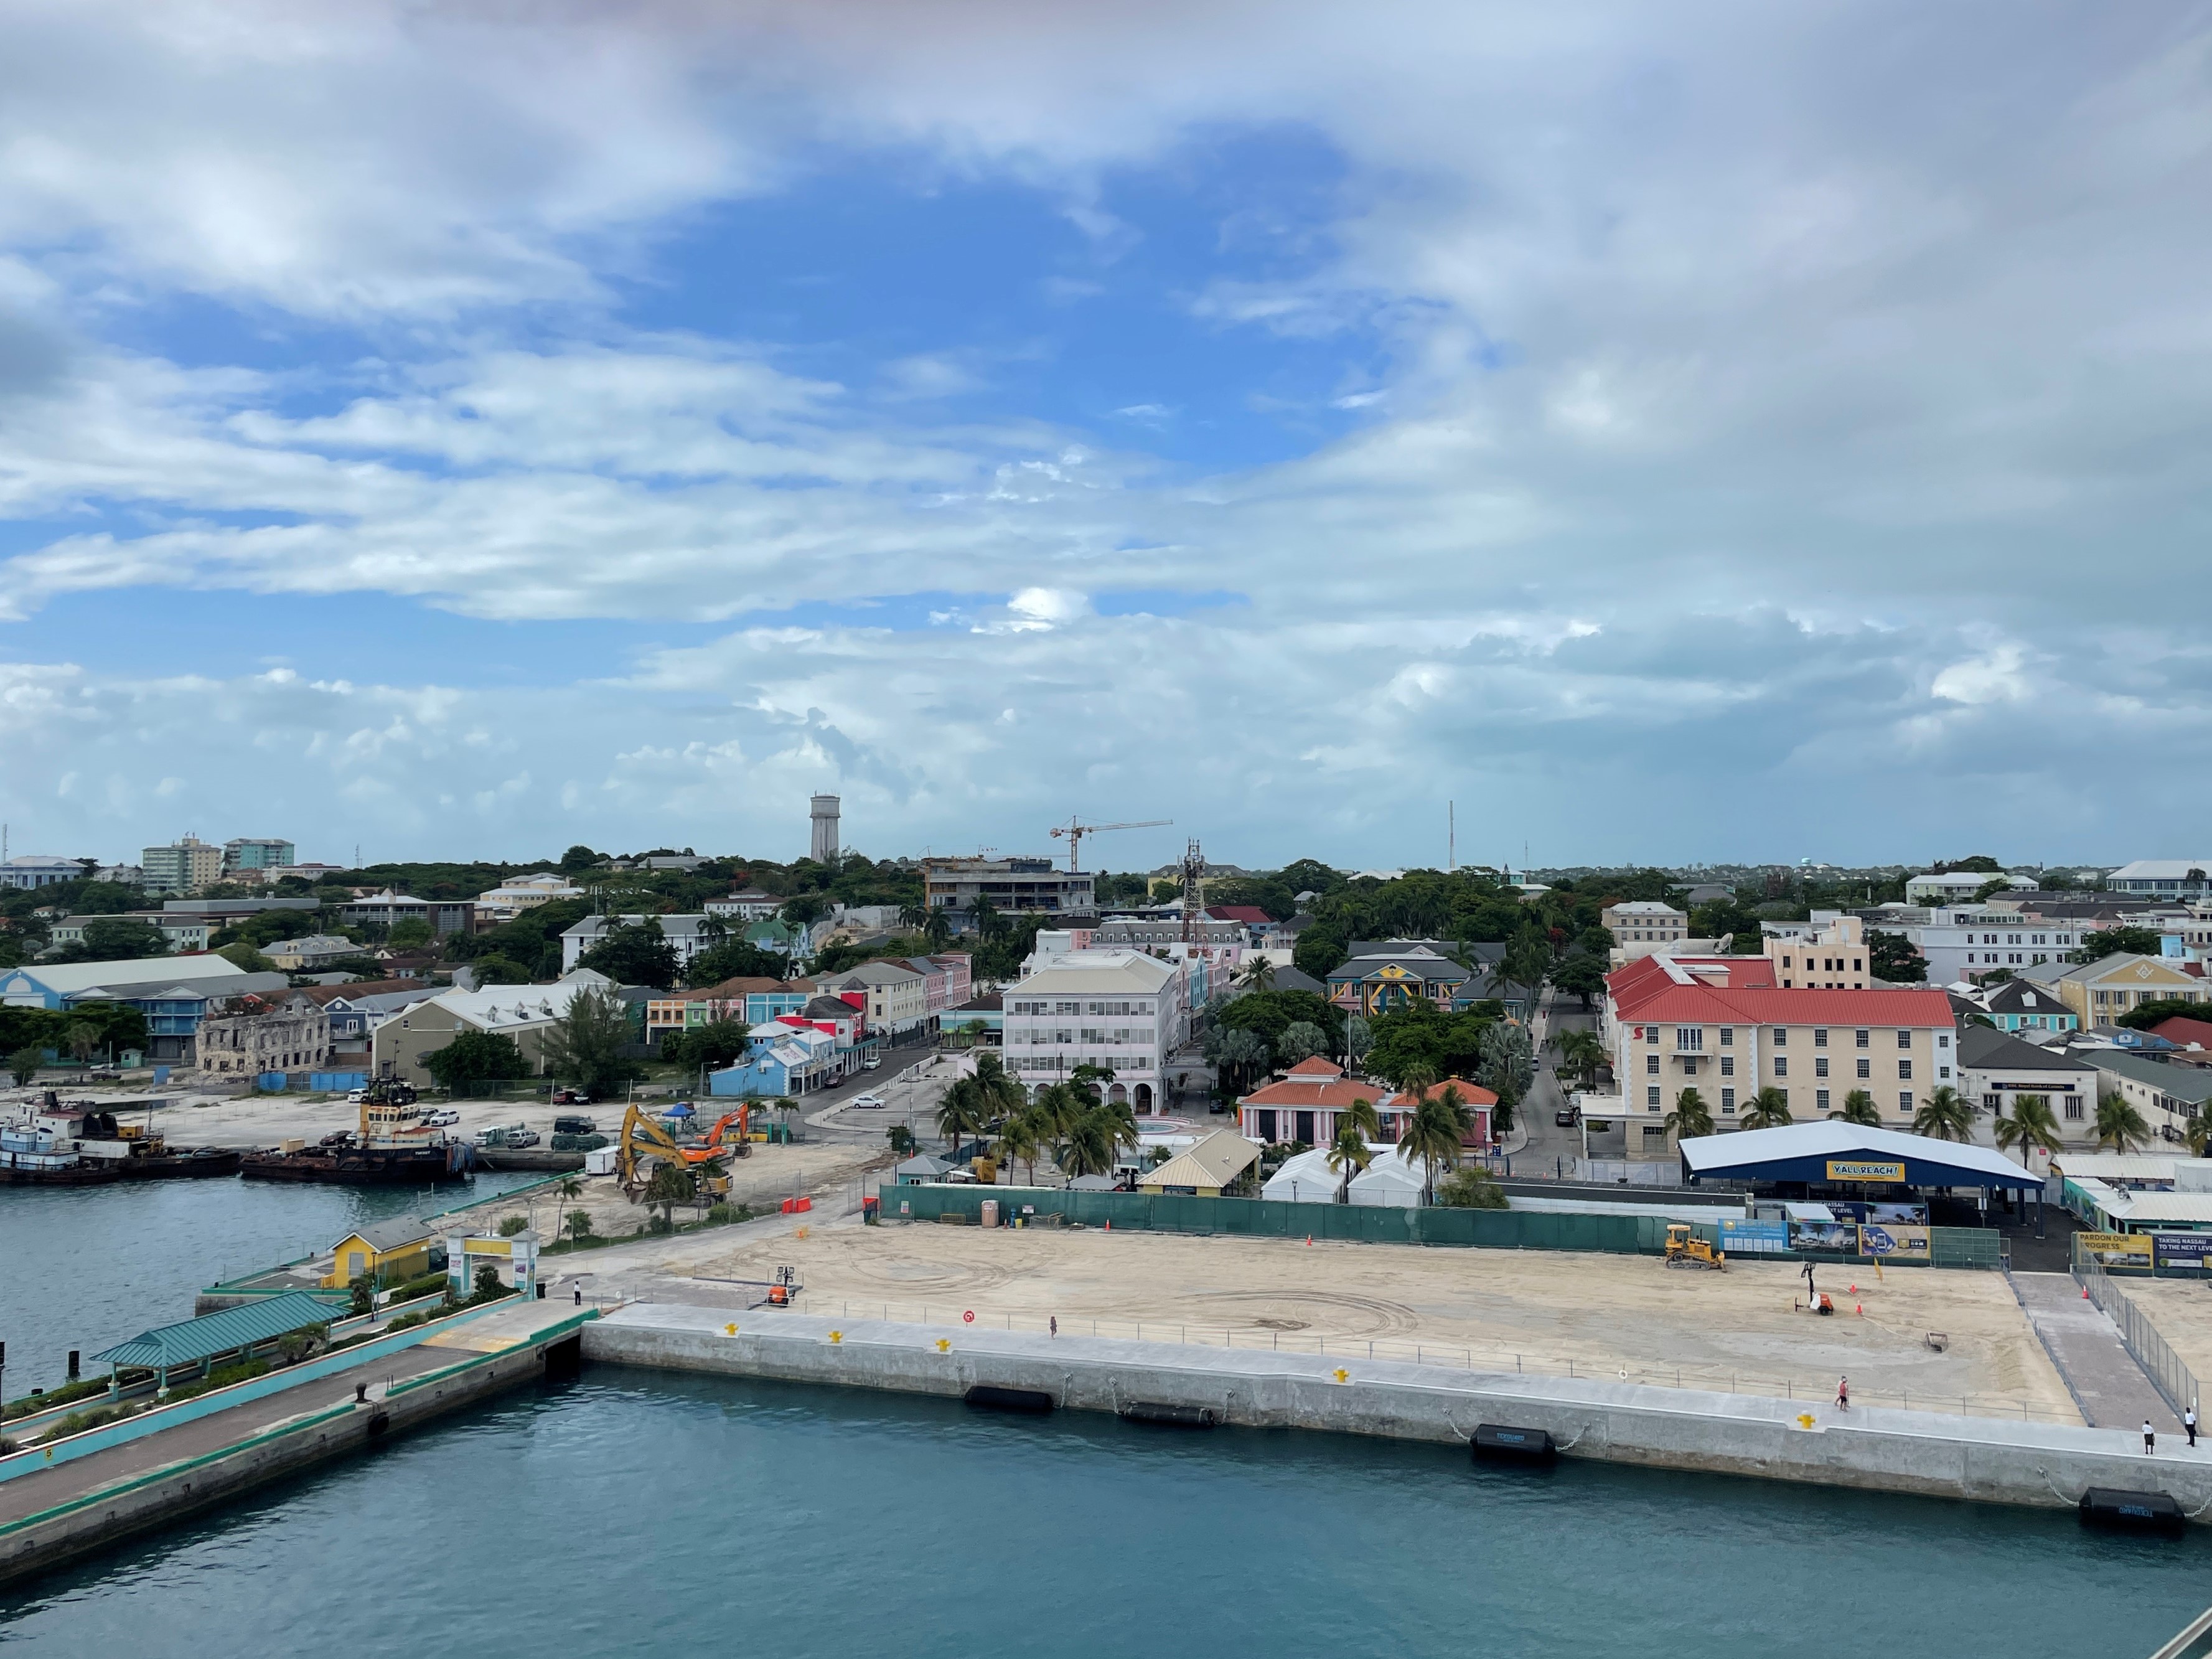 Nassau from cruise ship in 2021 with the shops closed